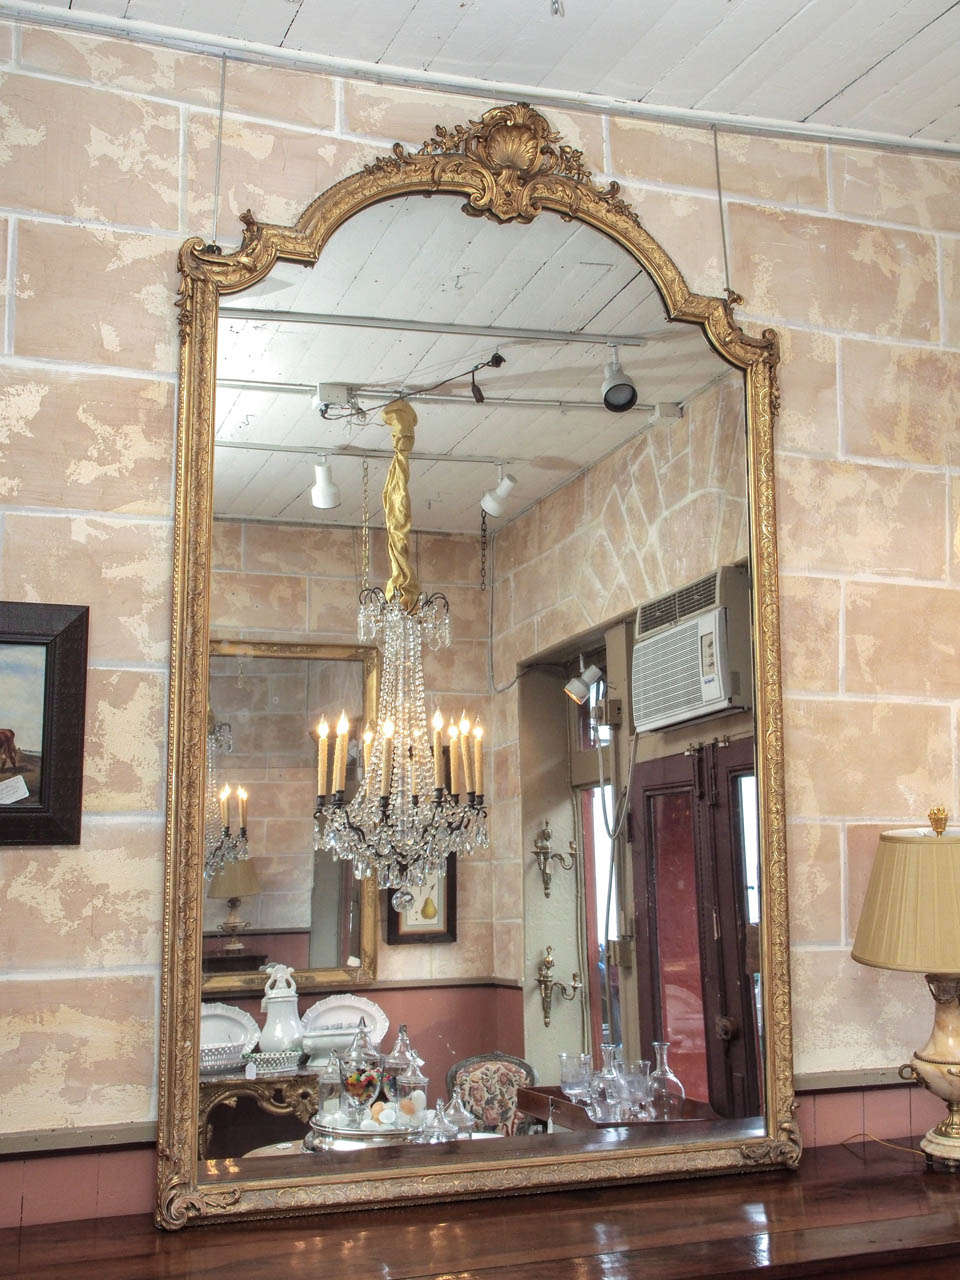 Grand French Napoleon III period carved and gilded mirror in the Regence taste, with shell ornament at crest.